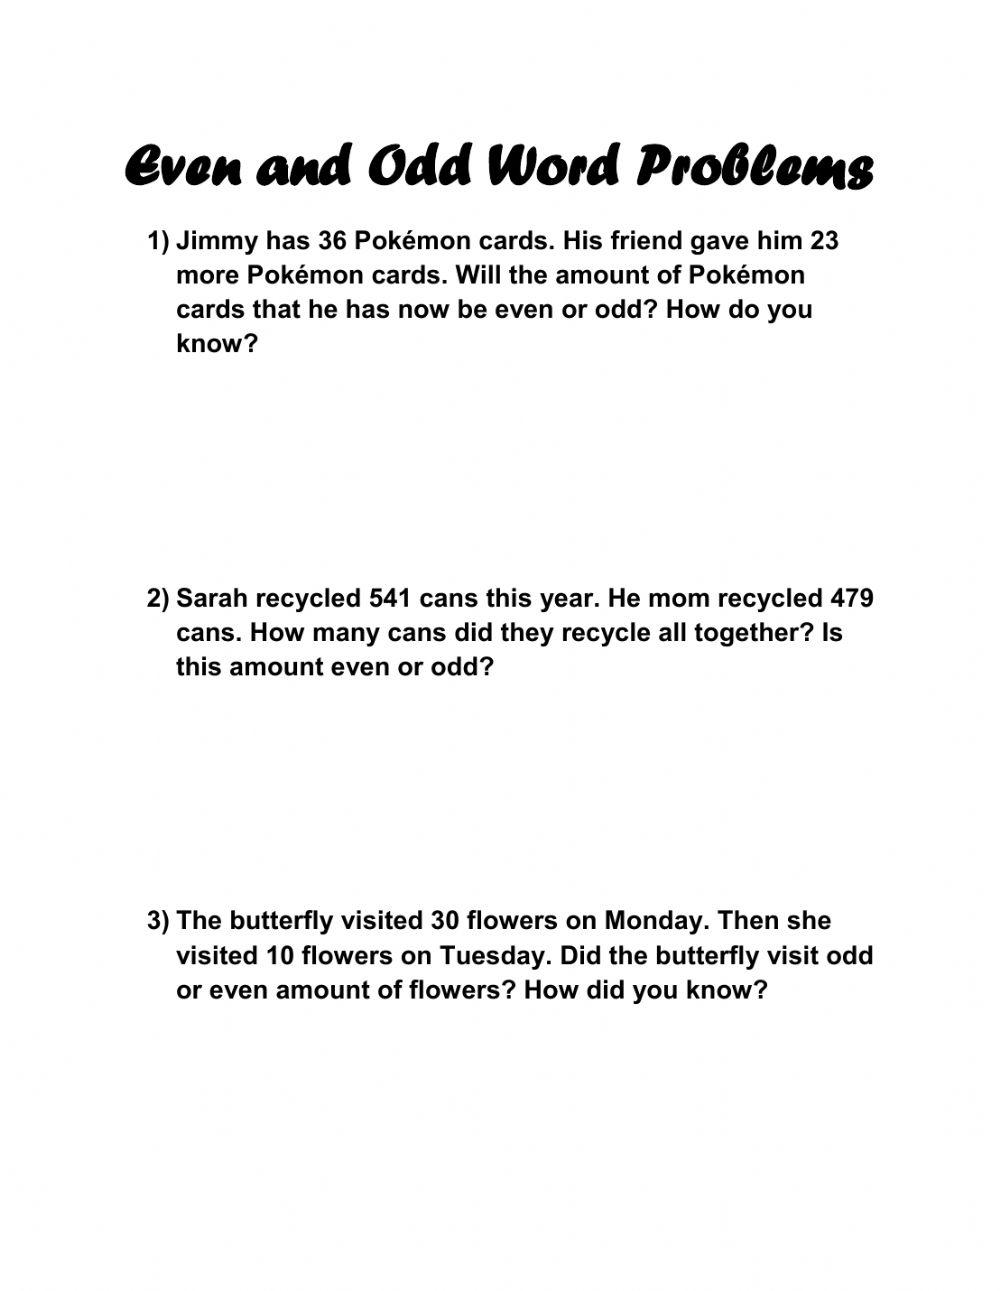 Even and Odd Word Problems